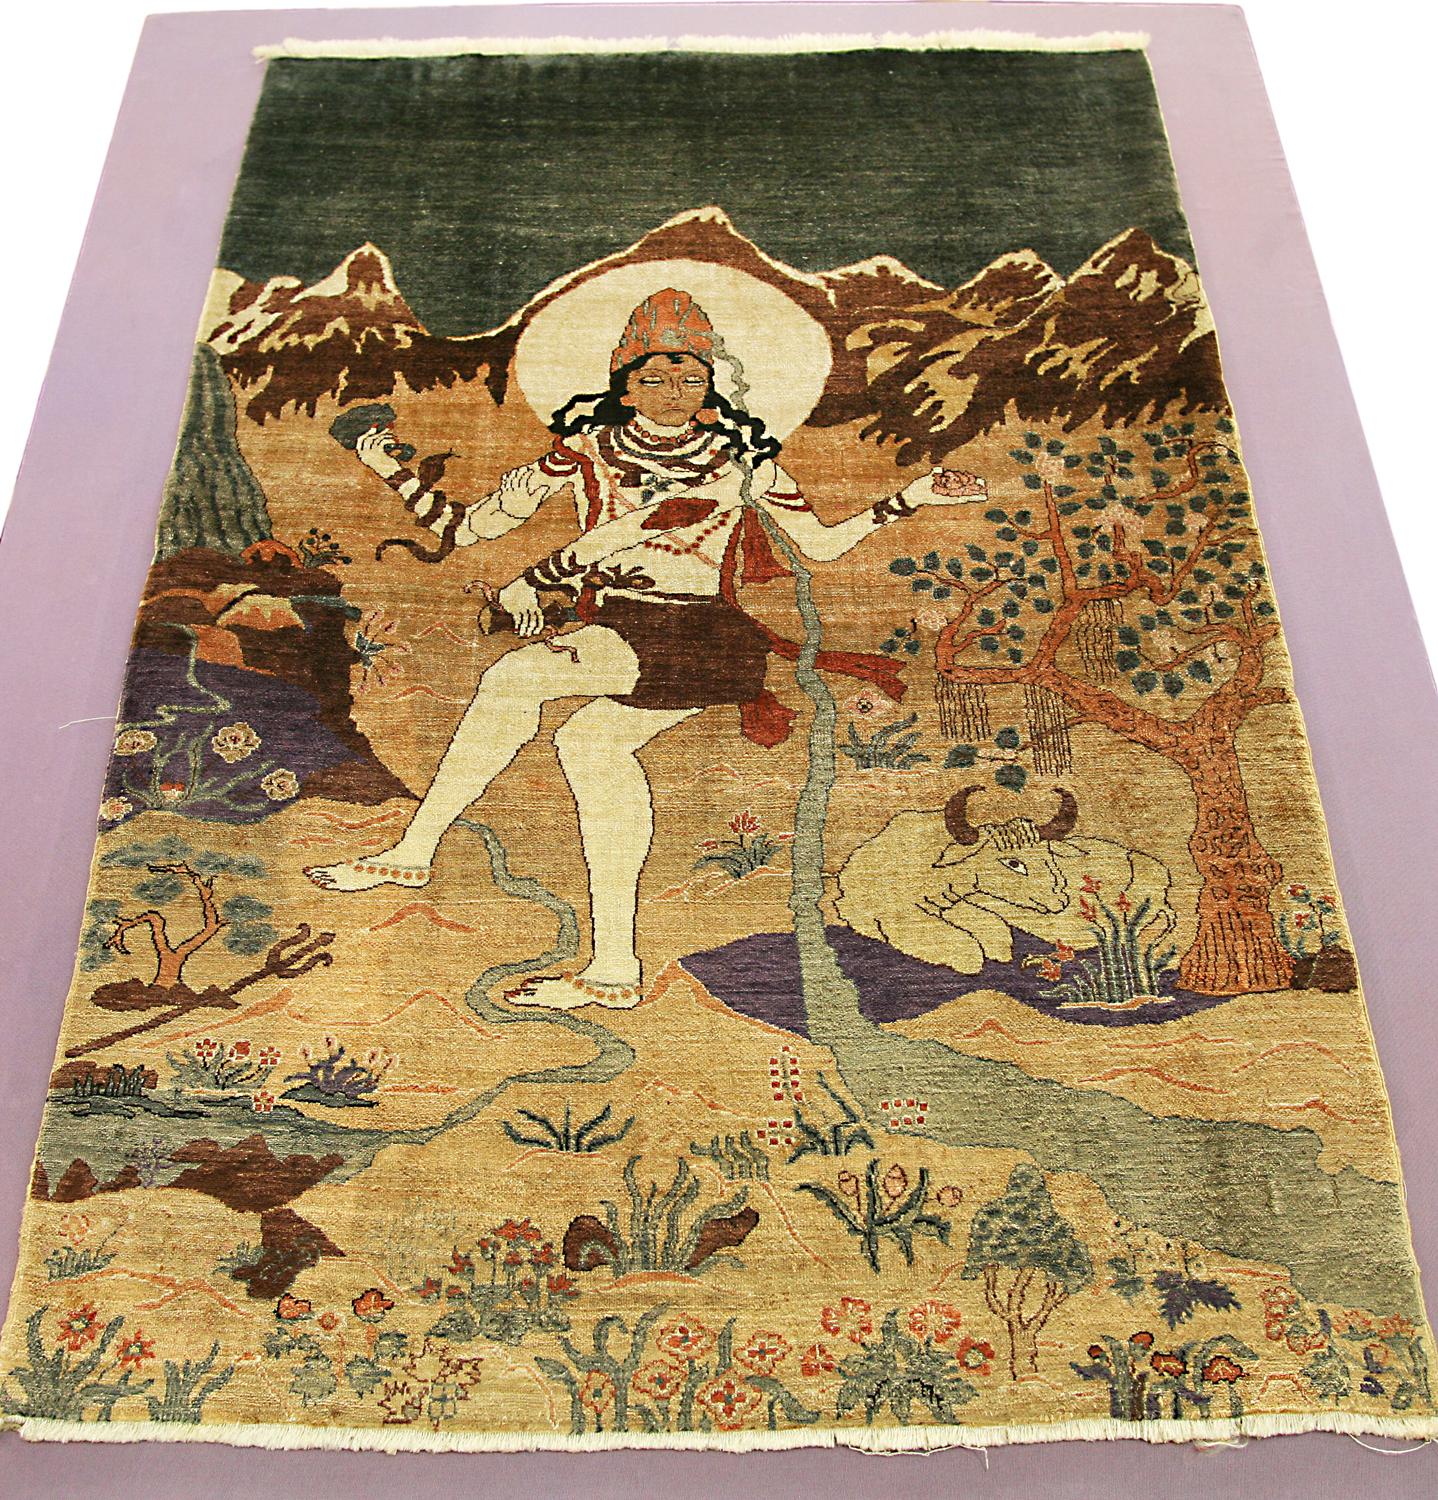 This is an antique silk Deccani rug woven in India during the beginning of the 20th century circa 1900 -1920's and measures 90x 63CM in size. This rug's design is of an Indian God set in nature with snowcapped mountains in the background. Also, in